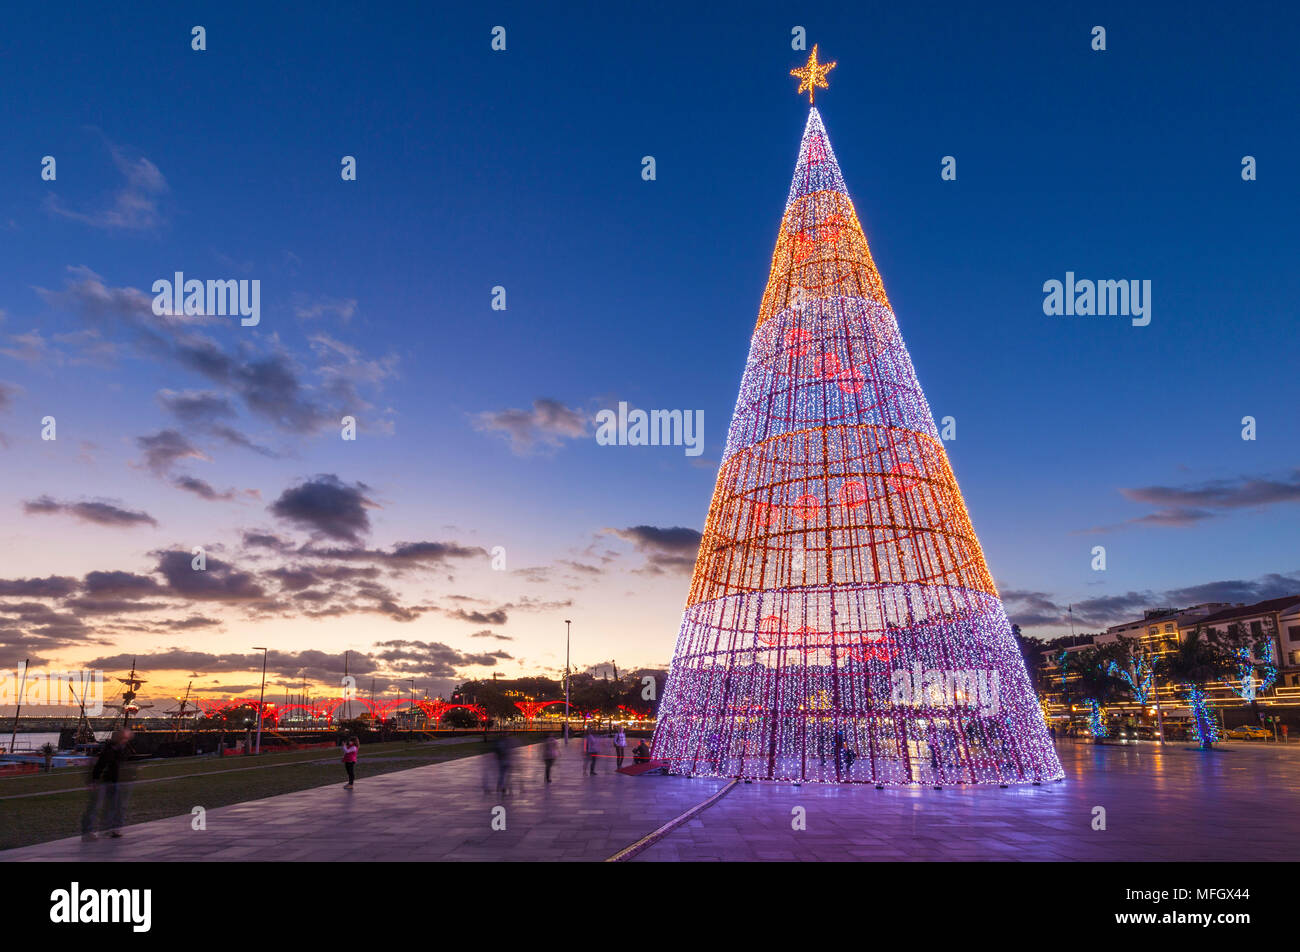 Modern design of Christmas tree with LED lights on the seafront promenade in Funchal, Madeira, Portugal, Altantic, Europe Stock Photo